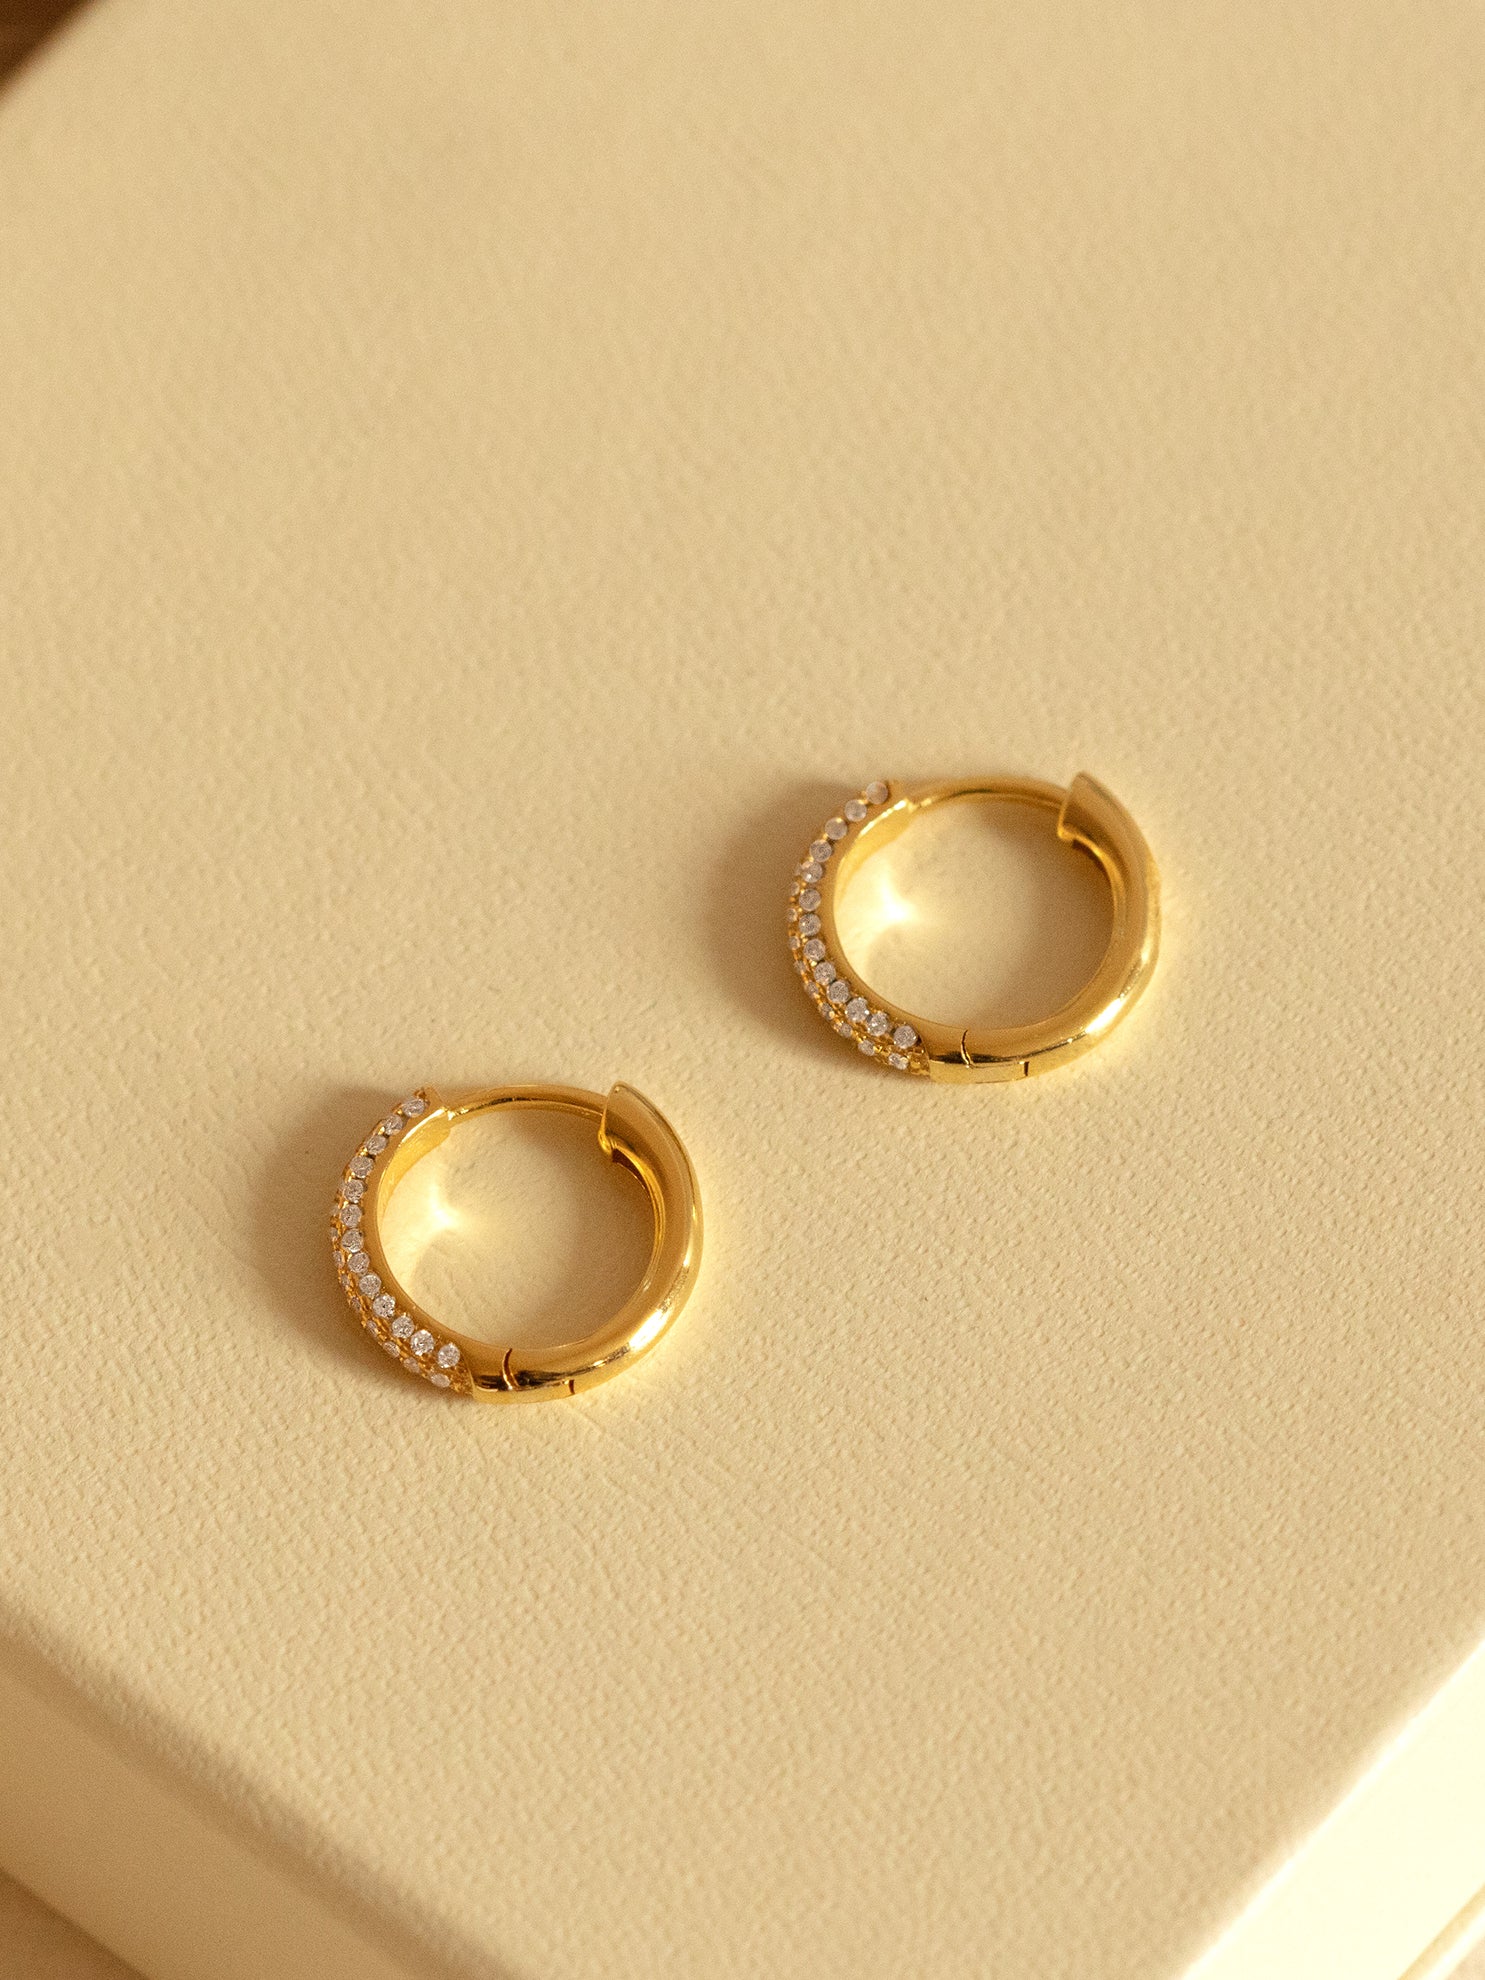 Gold Hoop Earrings With Sparkling Pave Stones